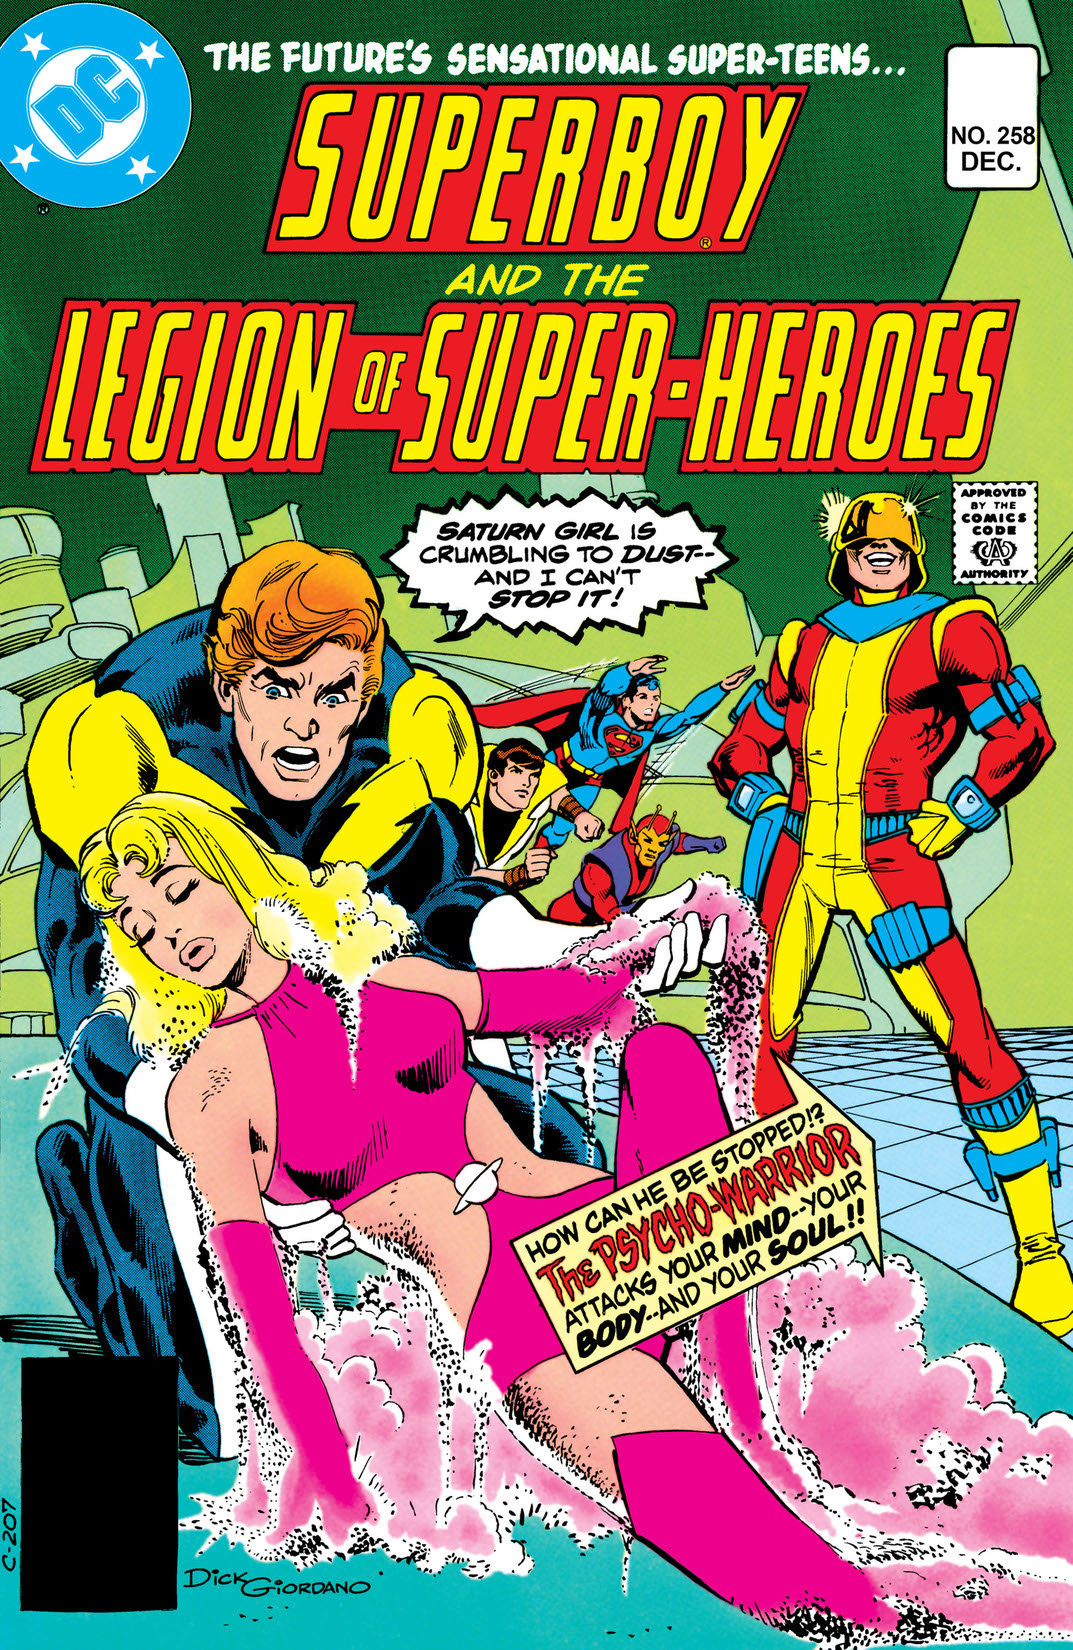 Superboy and the Legion of Super-Heroes (1977-) #258 preview images